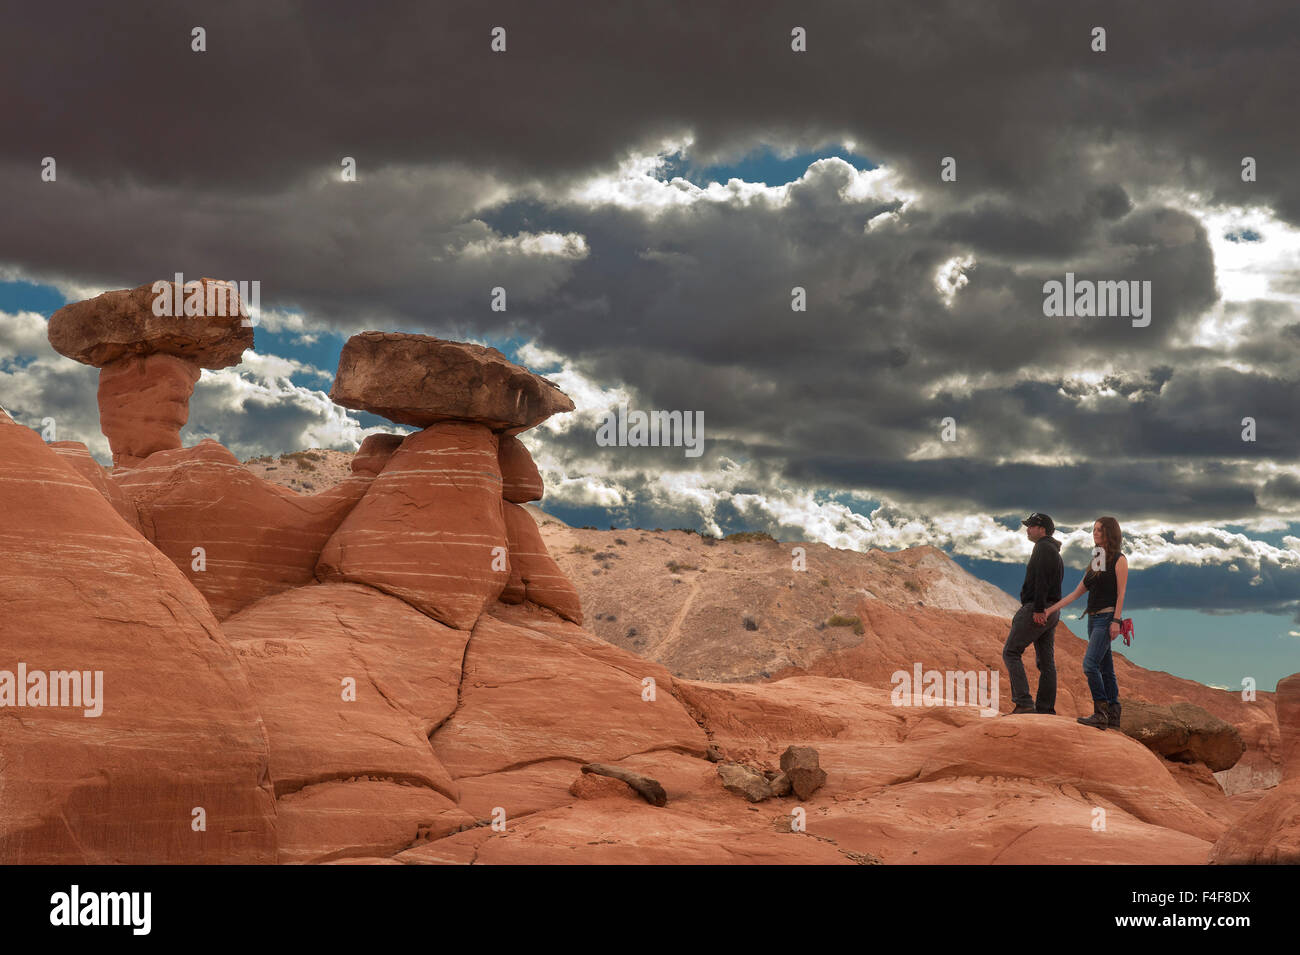 Couple Haven and Jan enjoying view, Toadstool area off Highway 89 near Kanab, Utah and Page Arizona. BLM land, Grand Staircase-Escalante National Monument Stock Photo